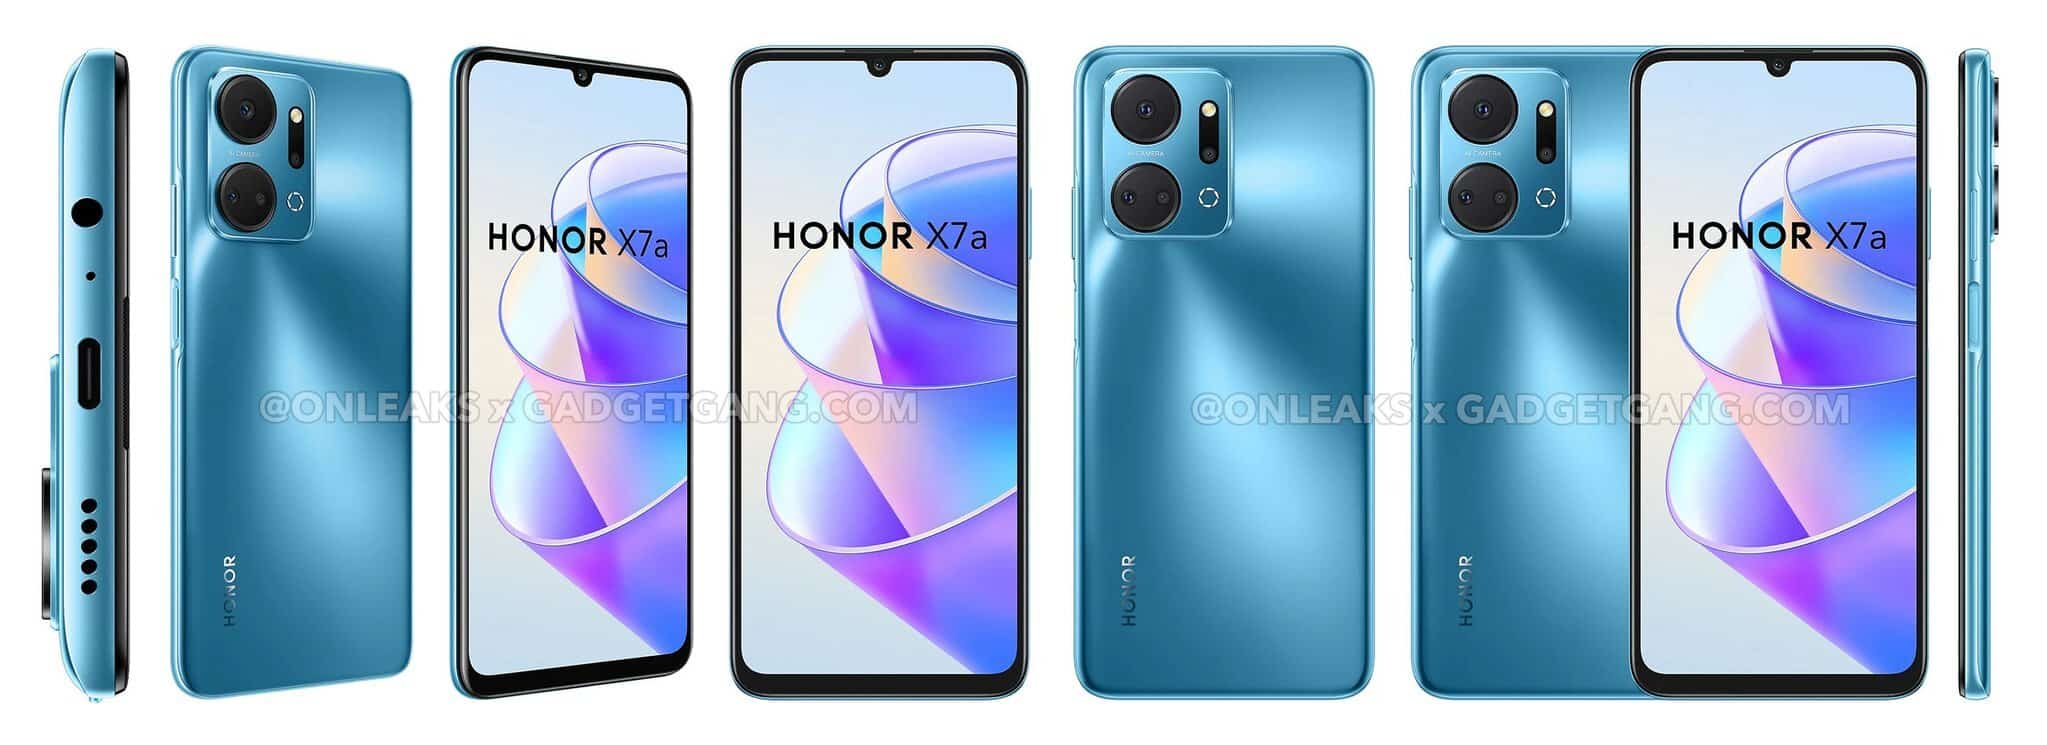 EXCLUSIVE: Honor X7a Specifications and Images Revealed